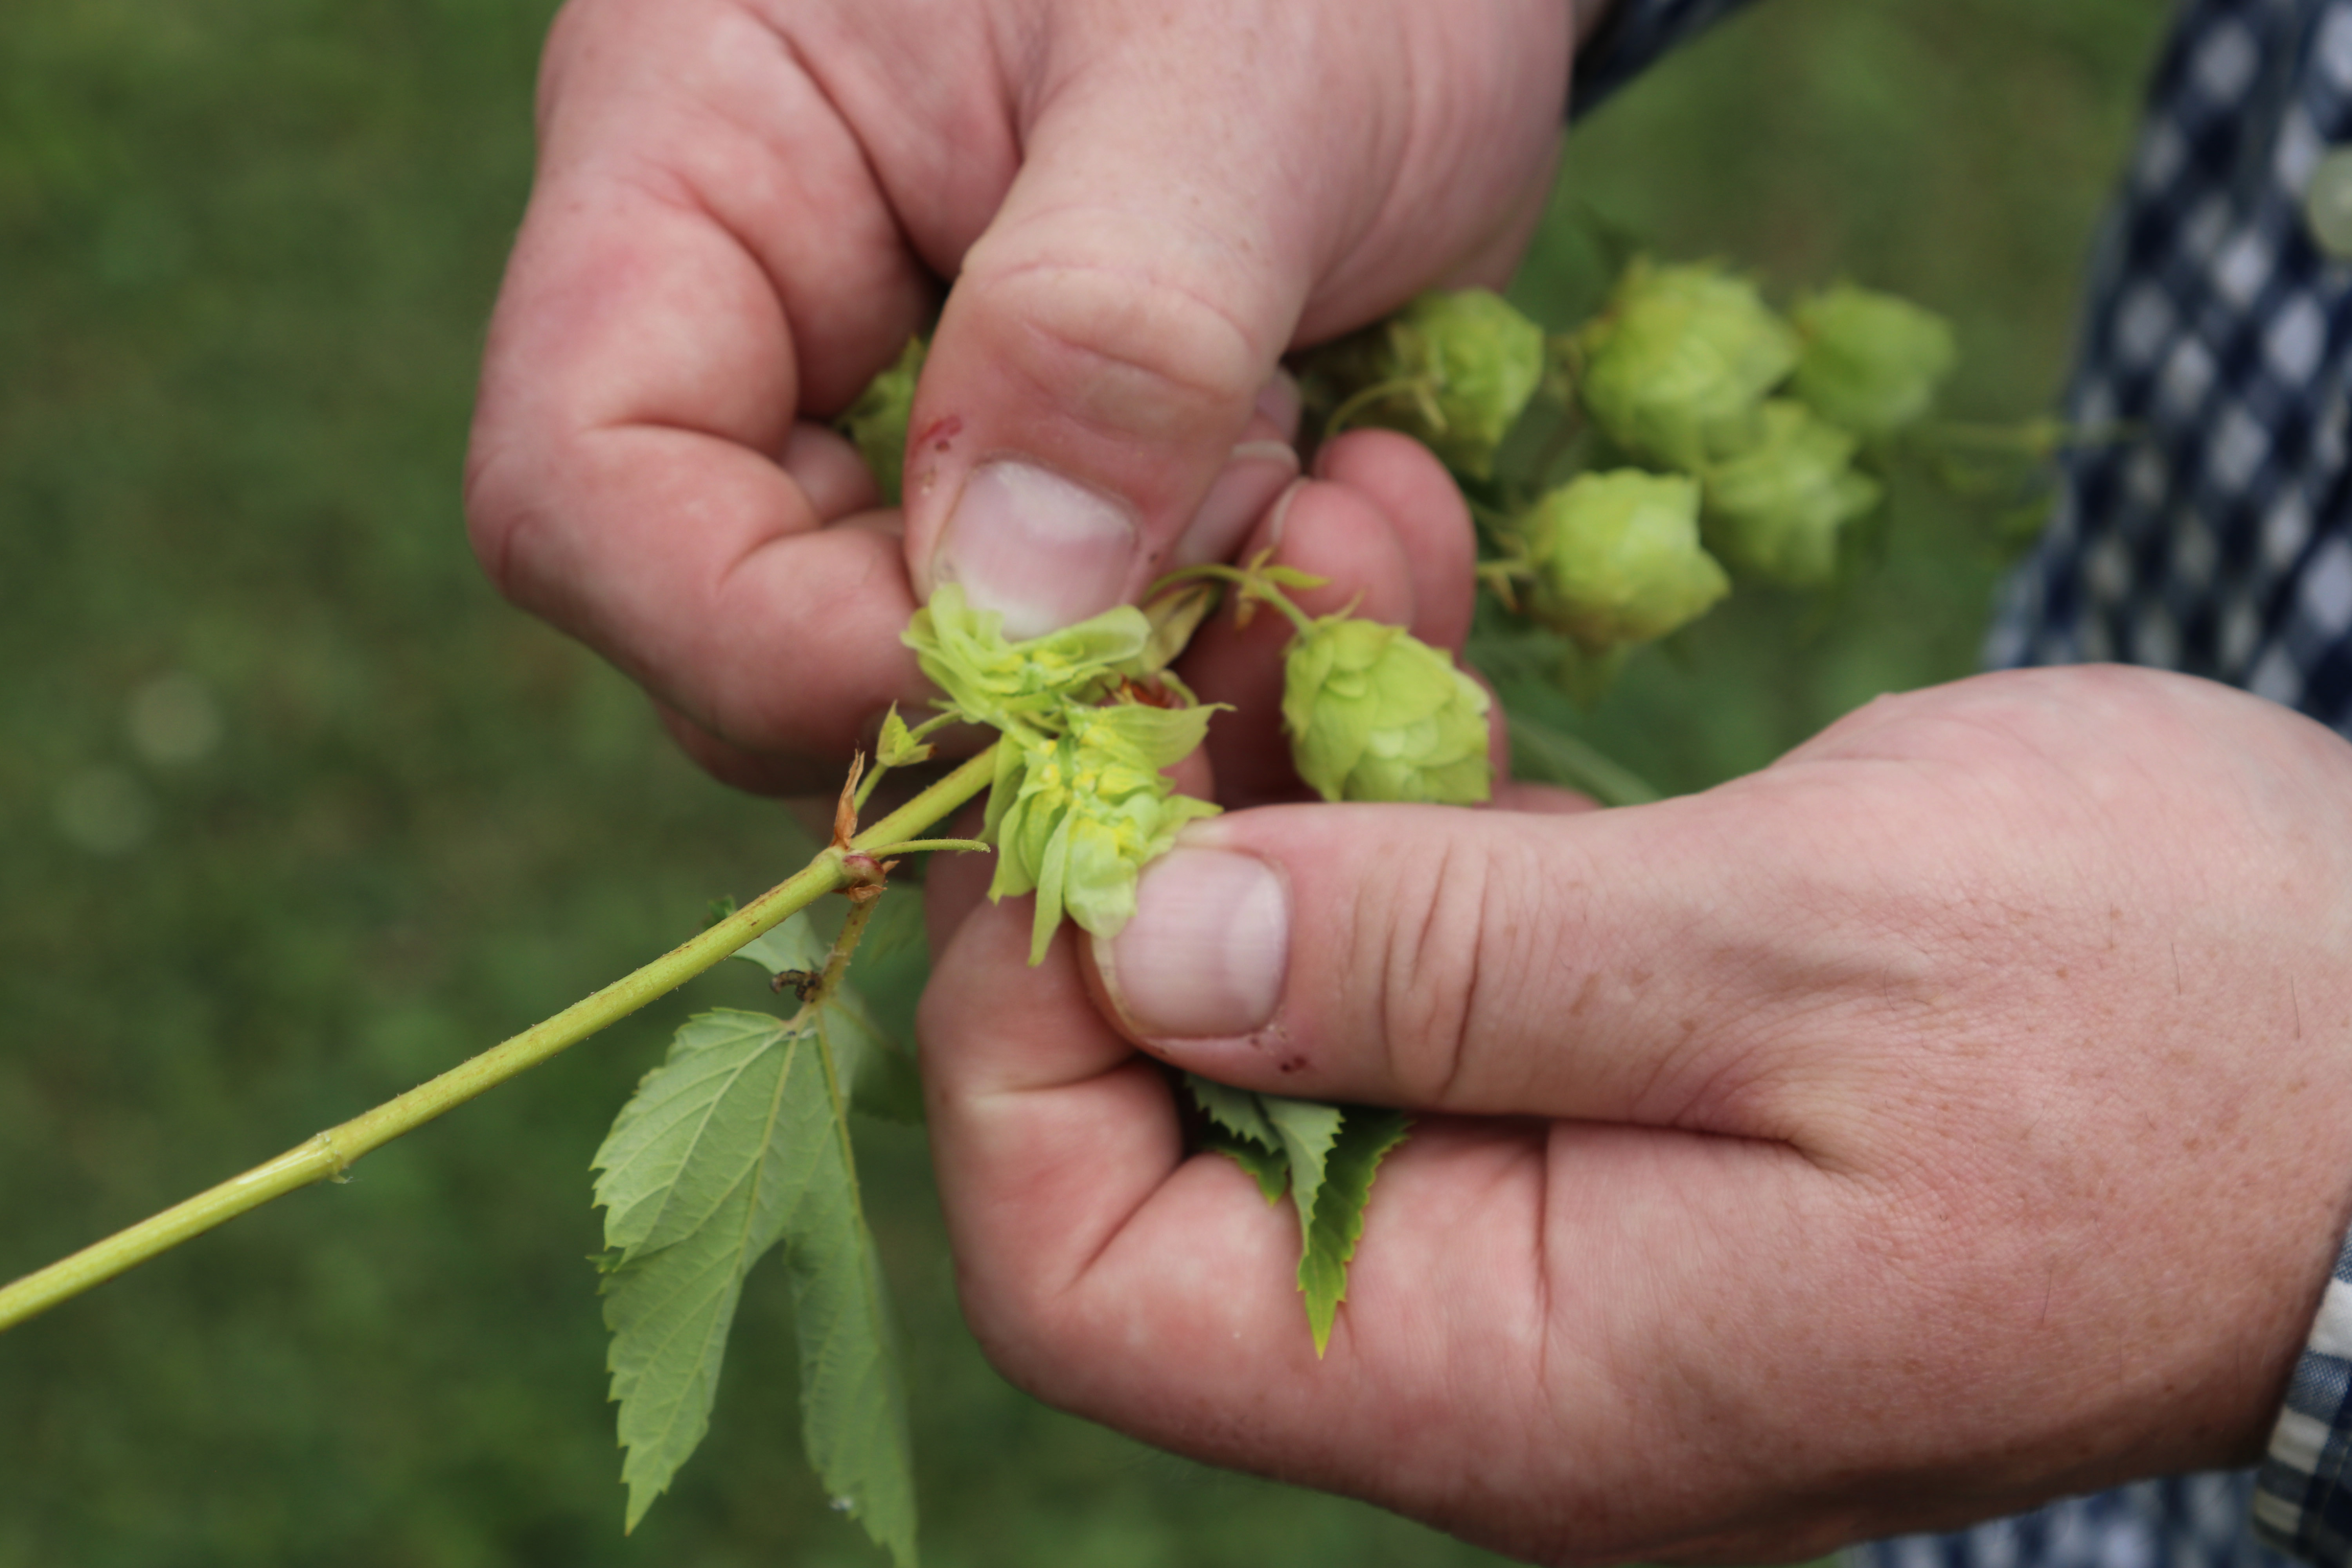 Hands separating hops to discover the lupulin glands inside.